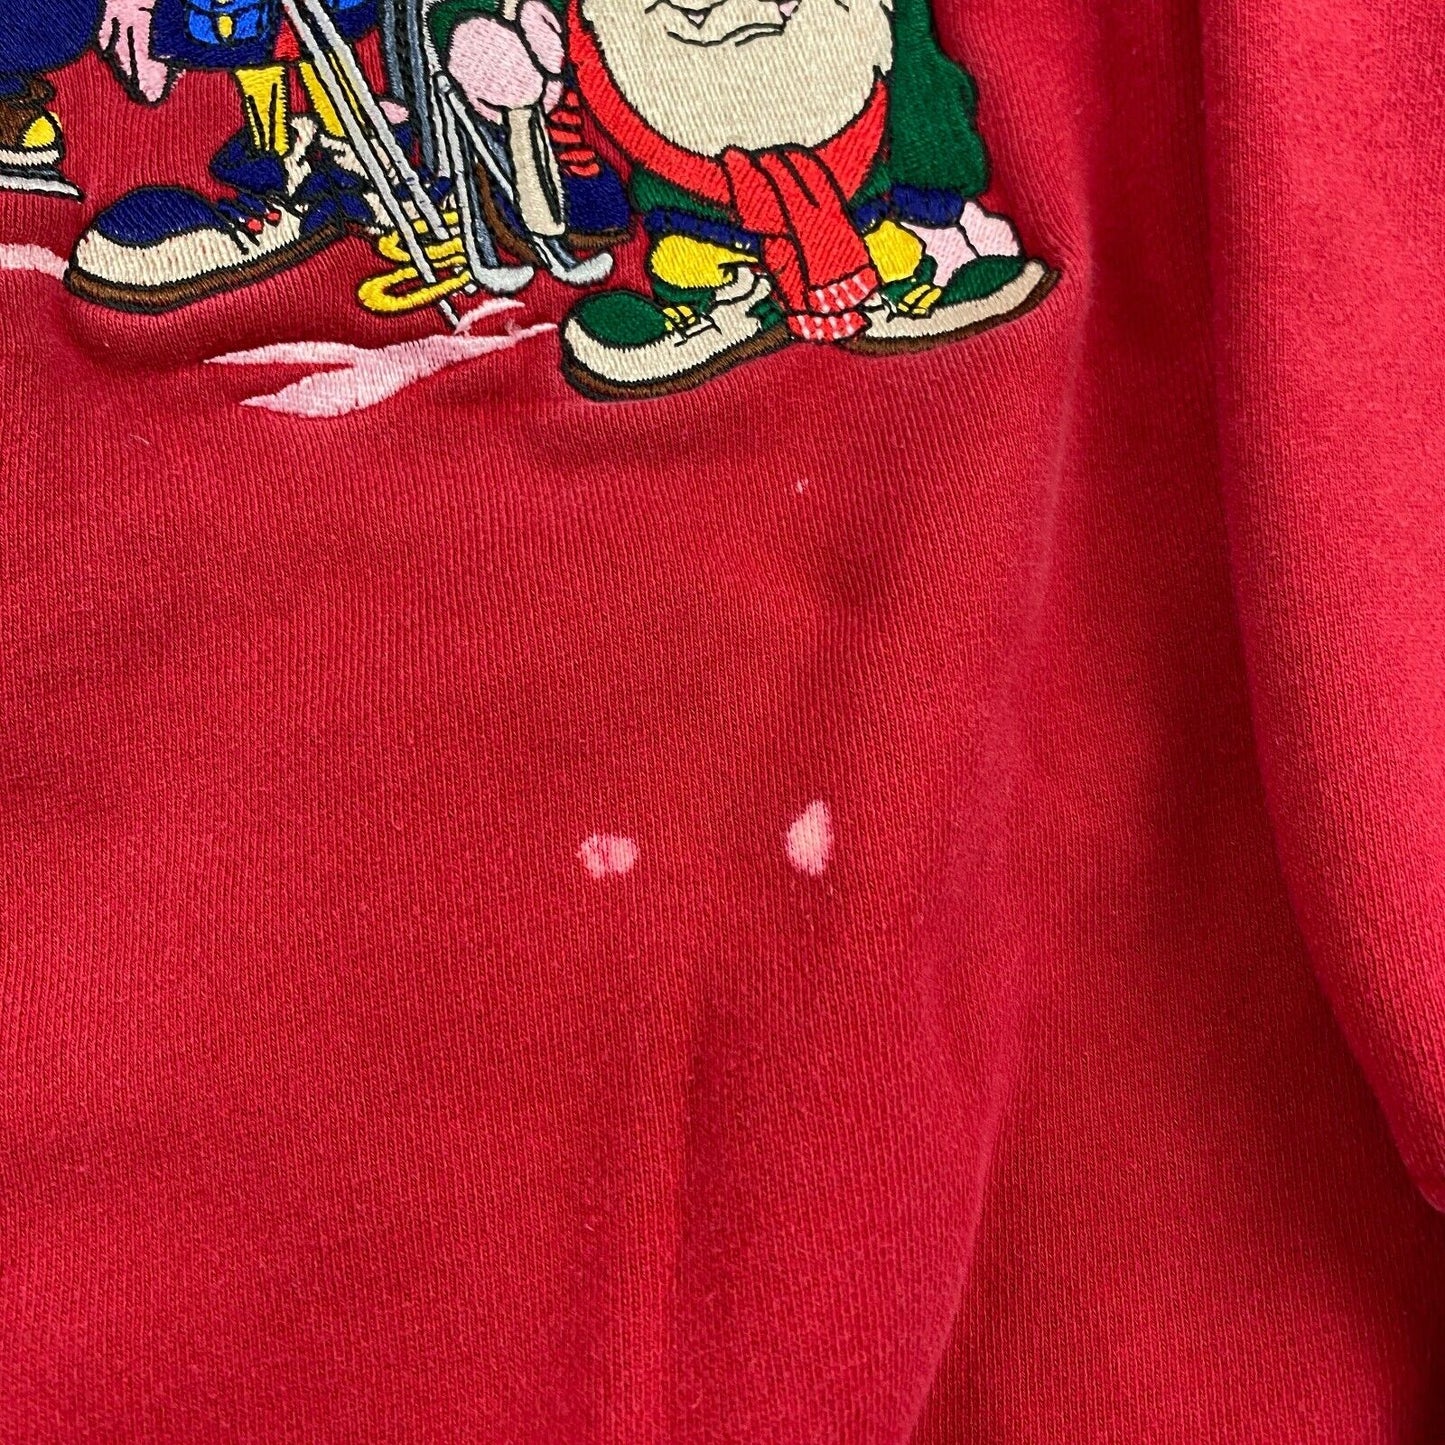 VINTAGE Looney Tunes Cartoon Skiing Embroidered Crewneck Sweater sz L Youth